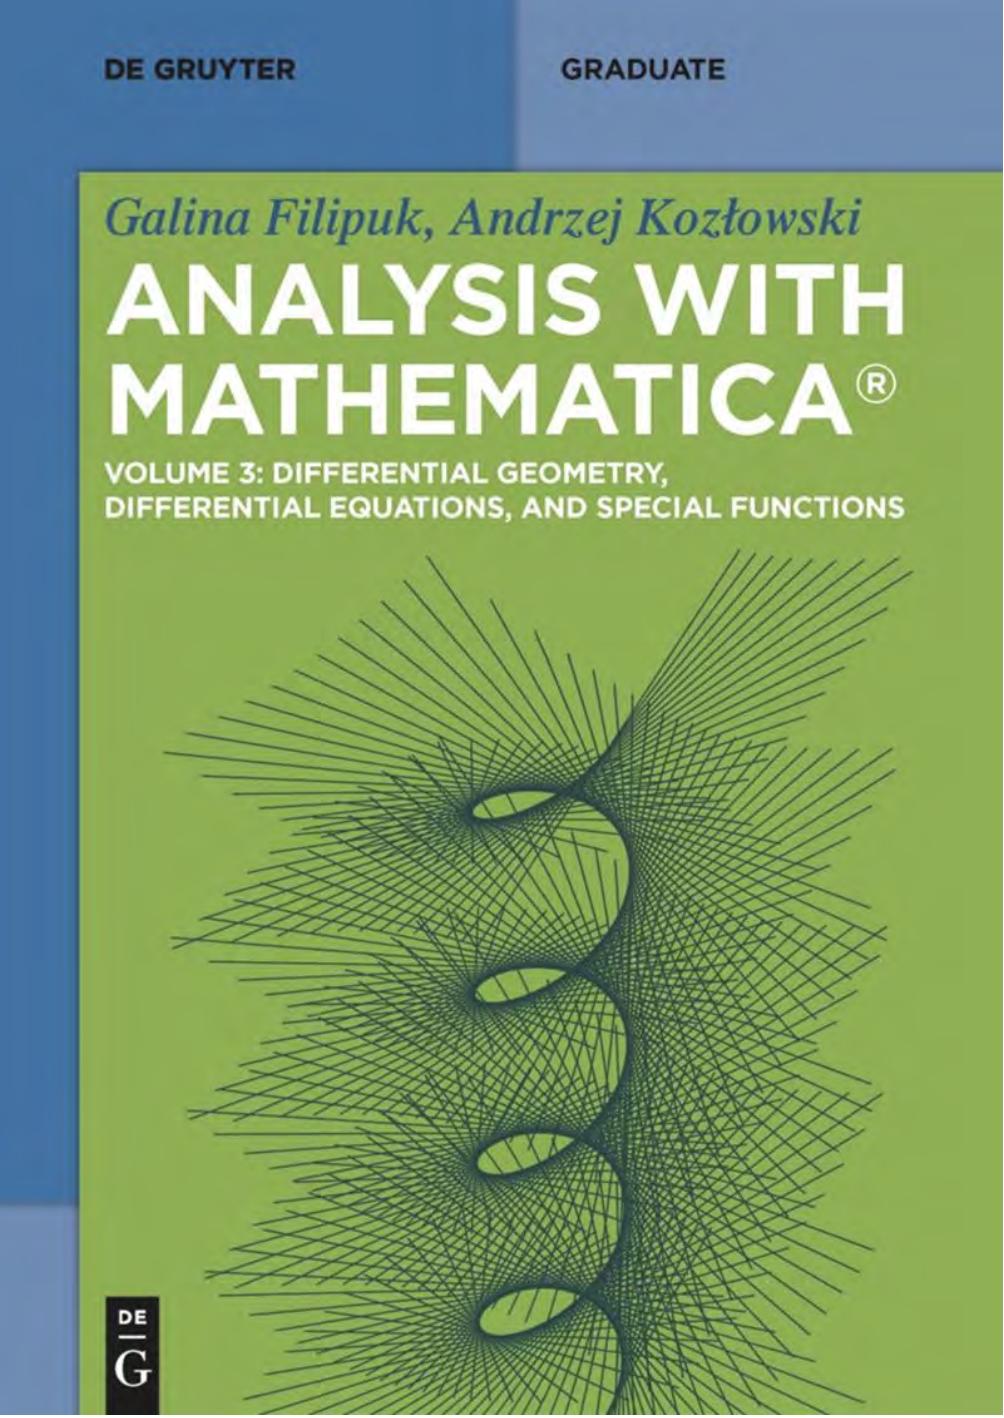 Analysis with Mathematica®, Vol. 3: Differential Geometry, Differential Equations, and Special Functions